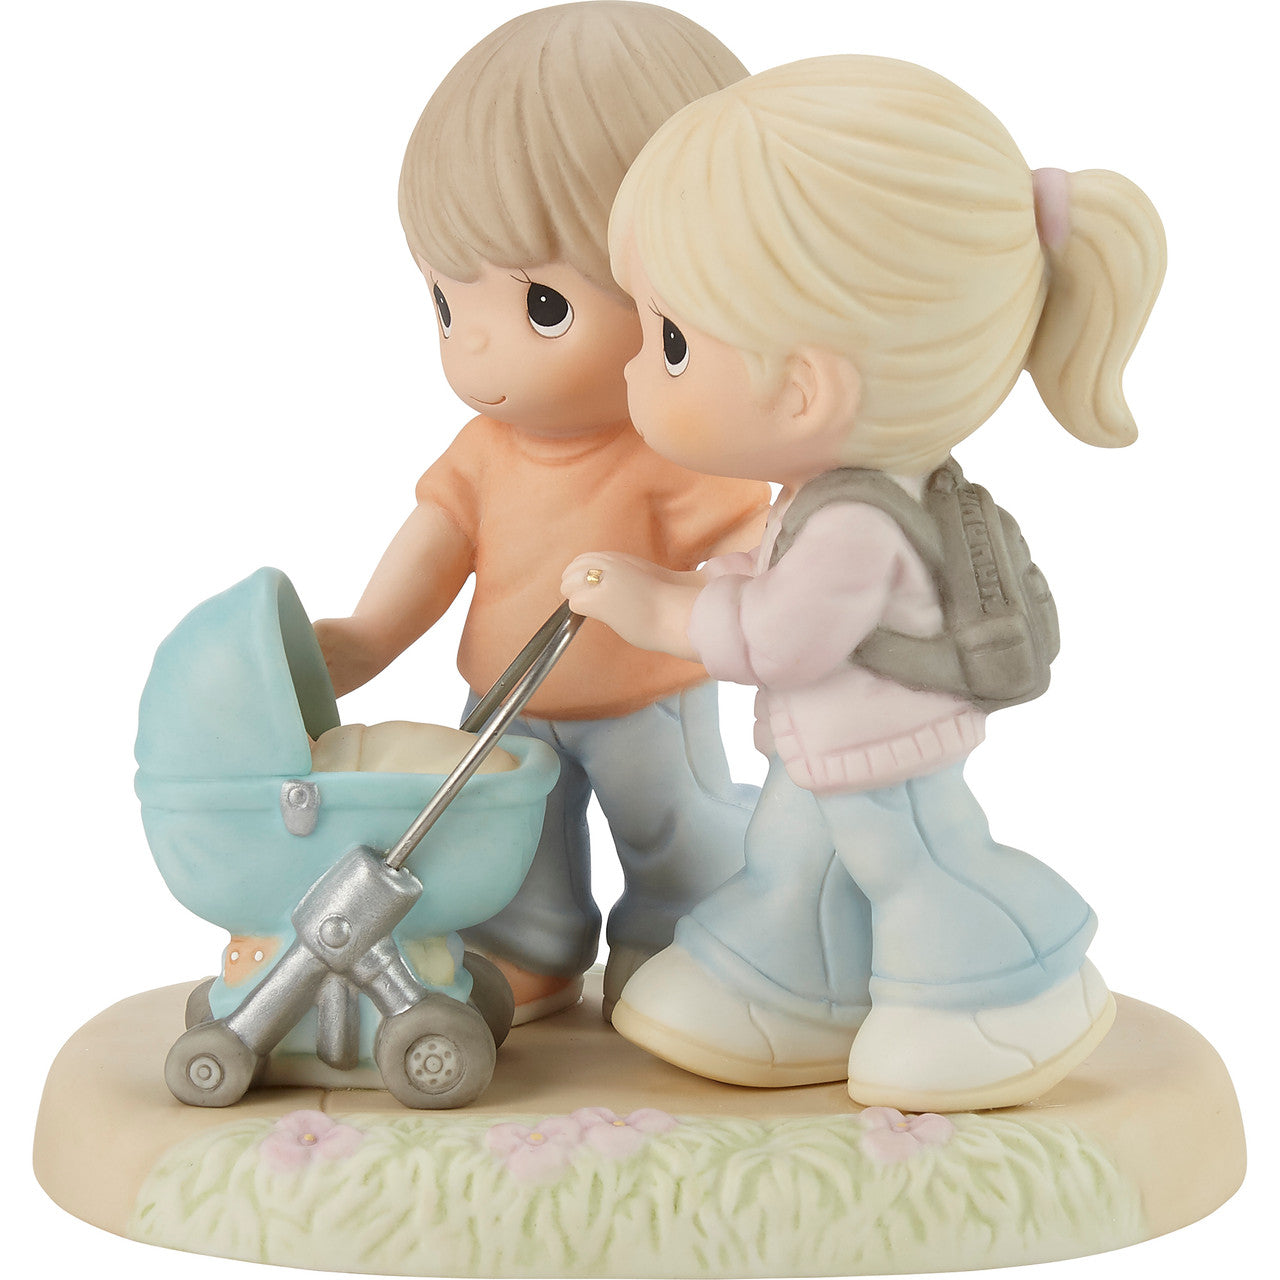 Precious Moments (You Strolled Into Our Hearts) Porcelain Figurine